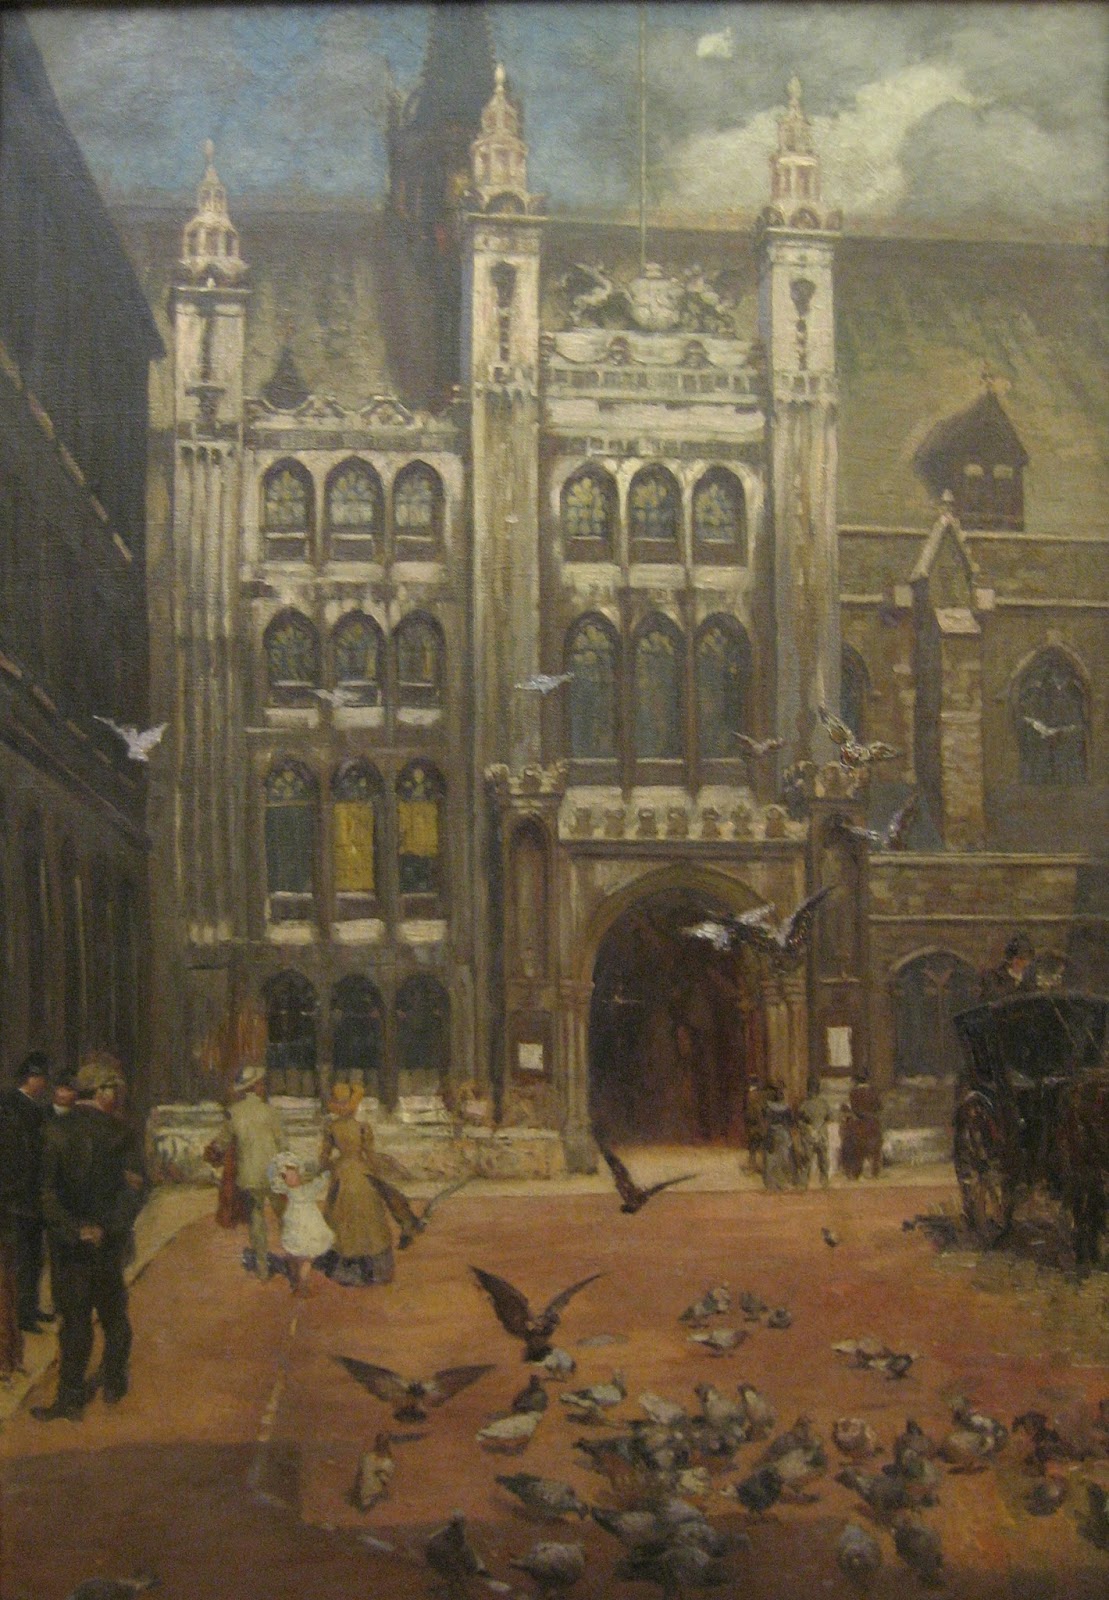 20 Years From Now: London's Guildhall Art Gallery1109 x 1600